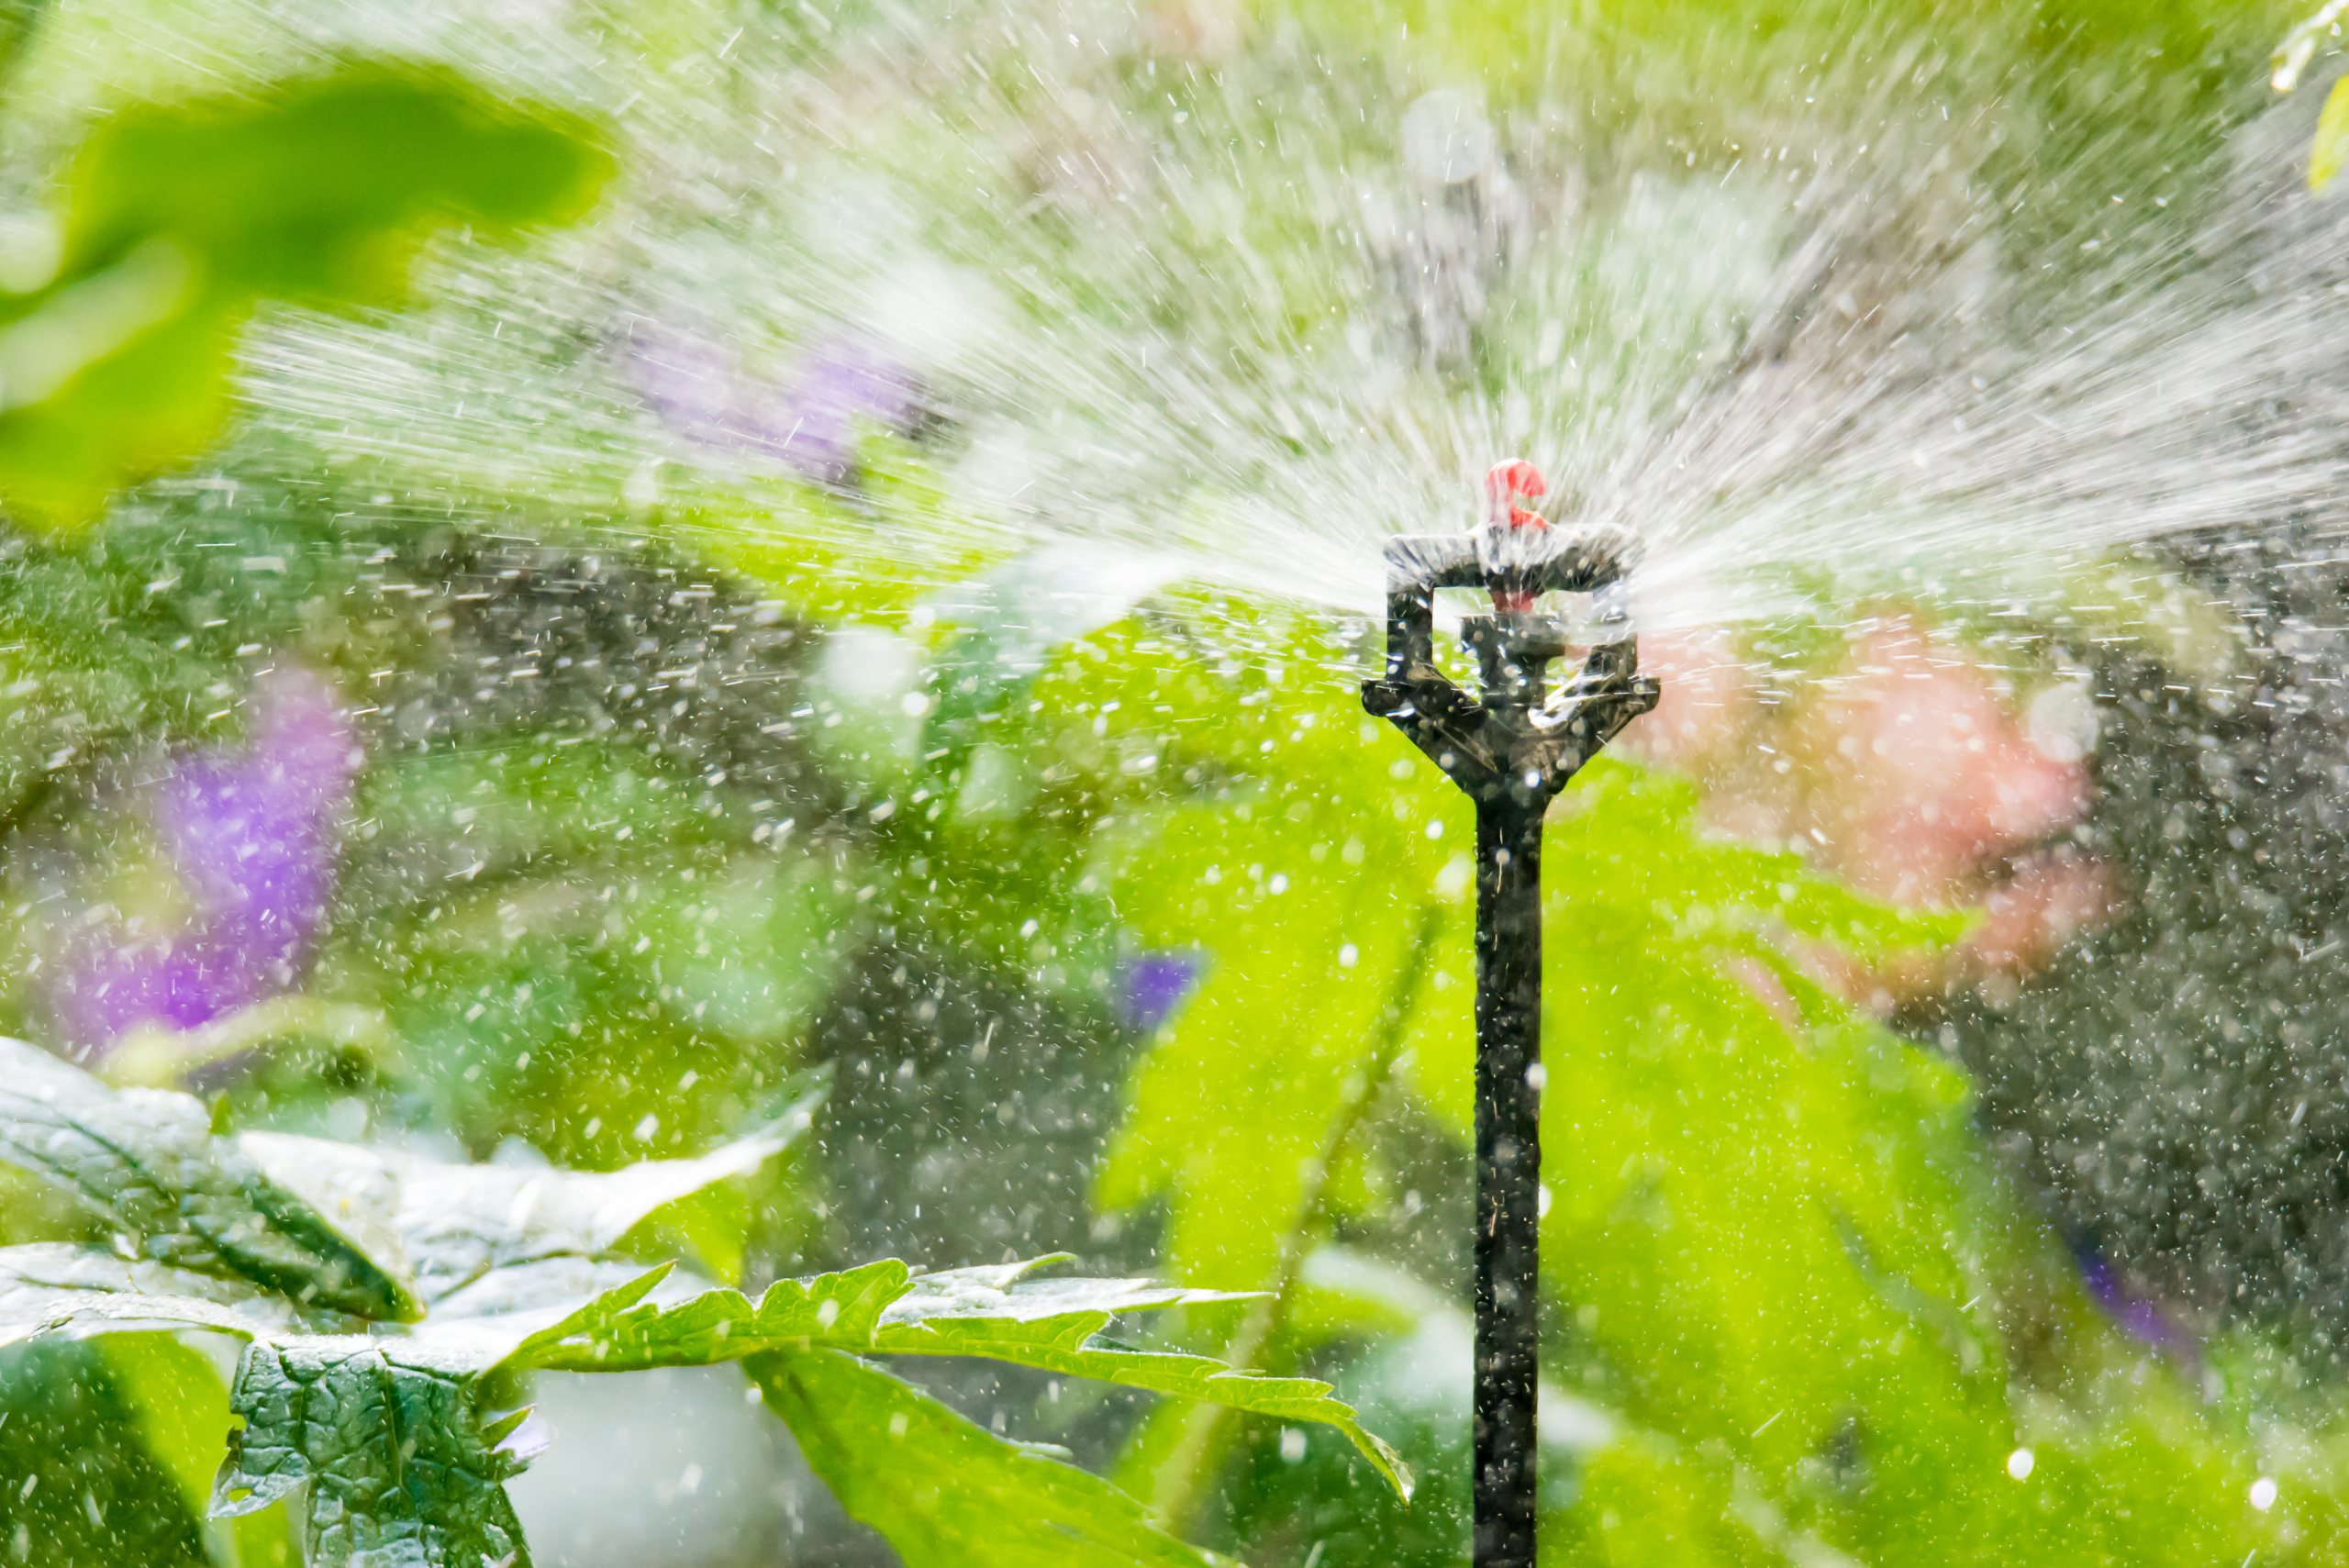 How to Build Your Own DIY Lawn Sprinkler System